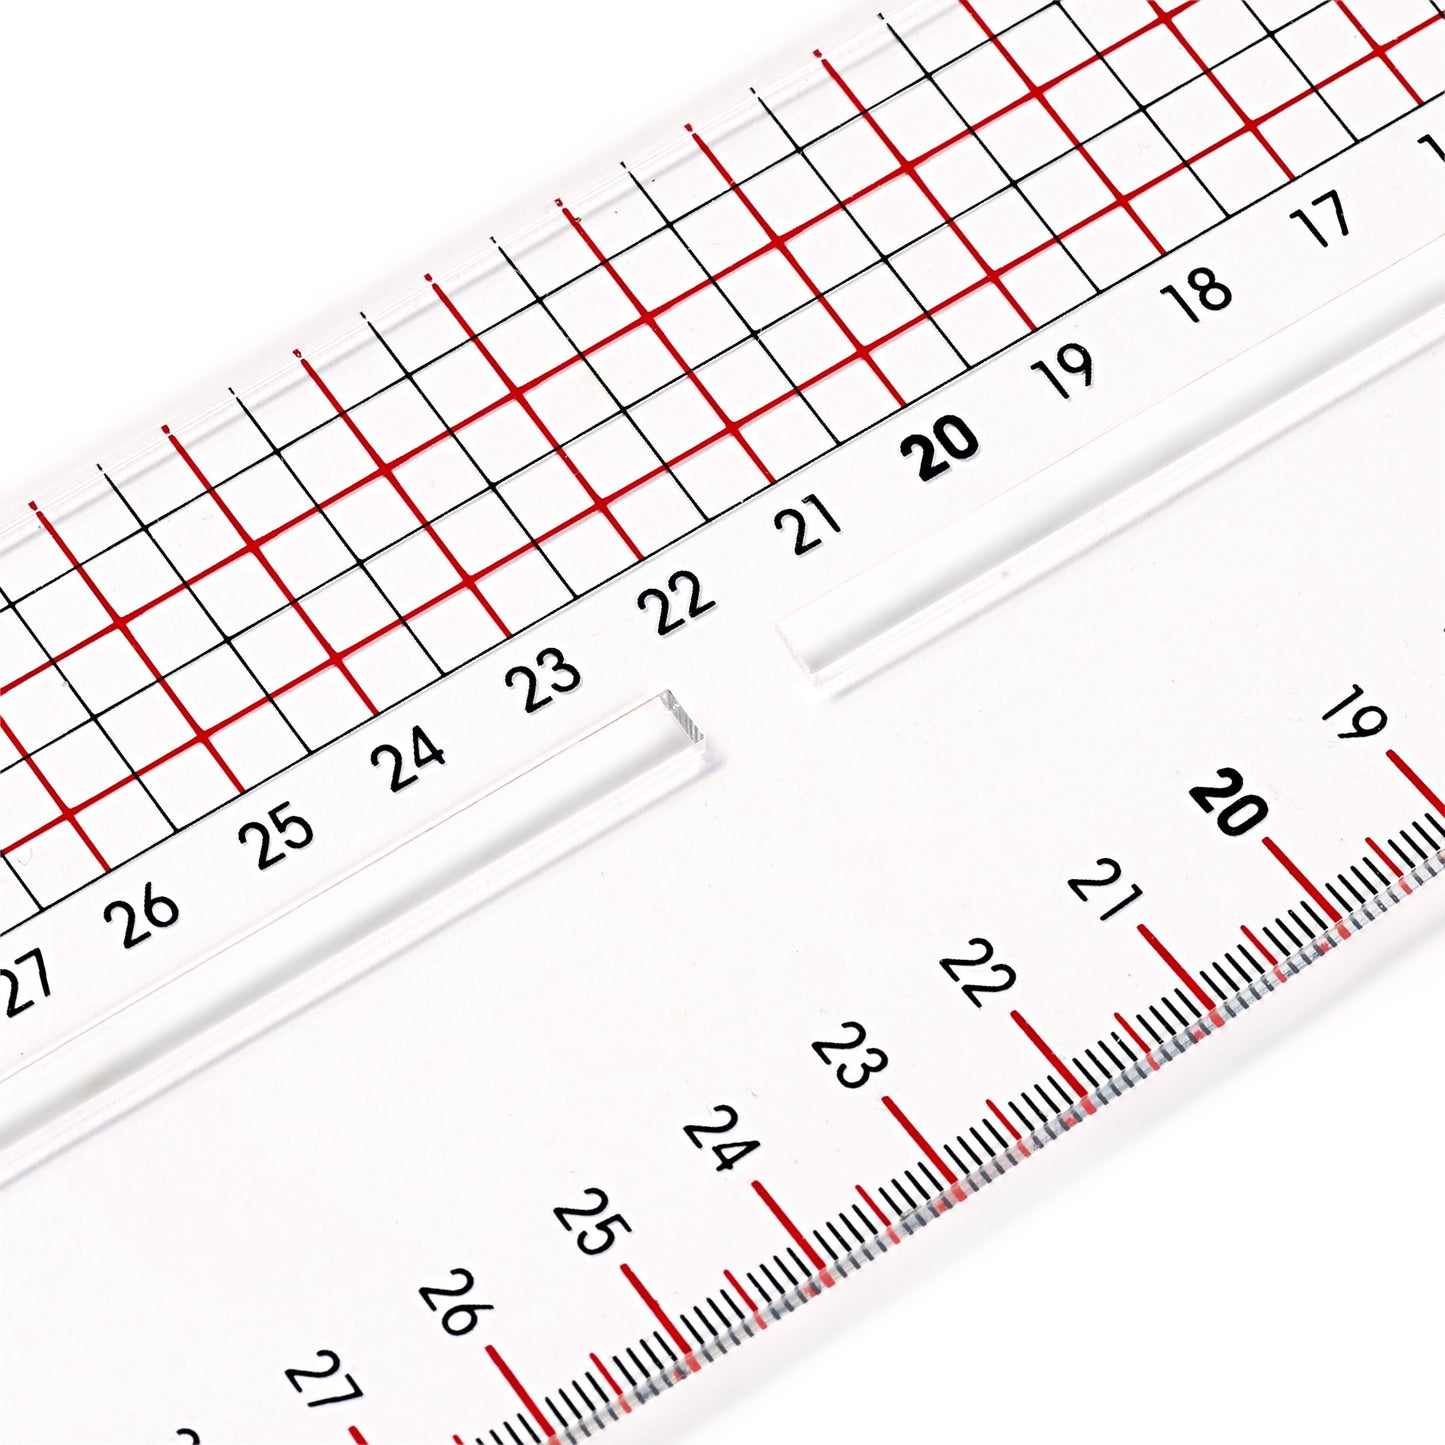 Prym (metric) French curve or curved ruler